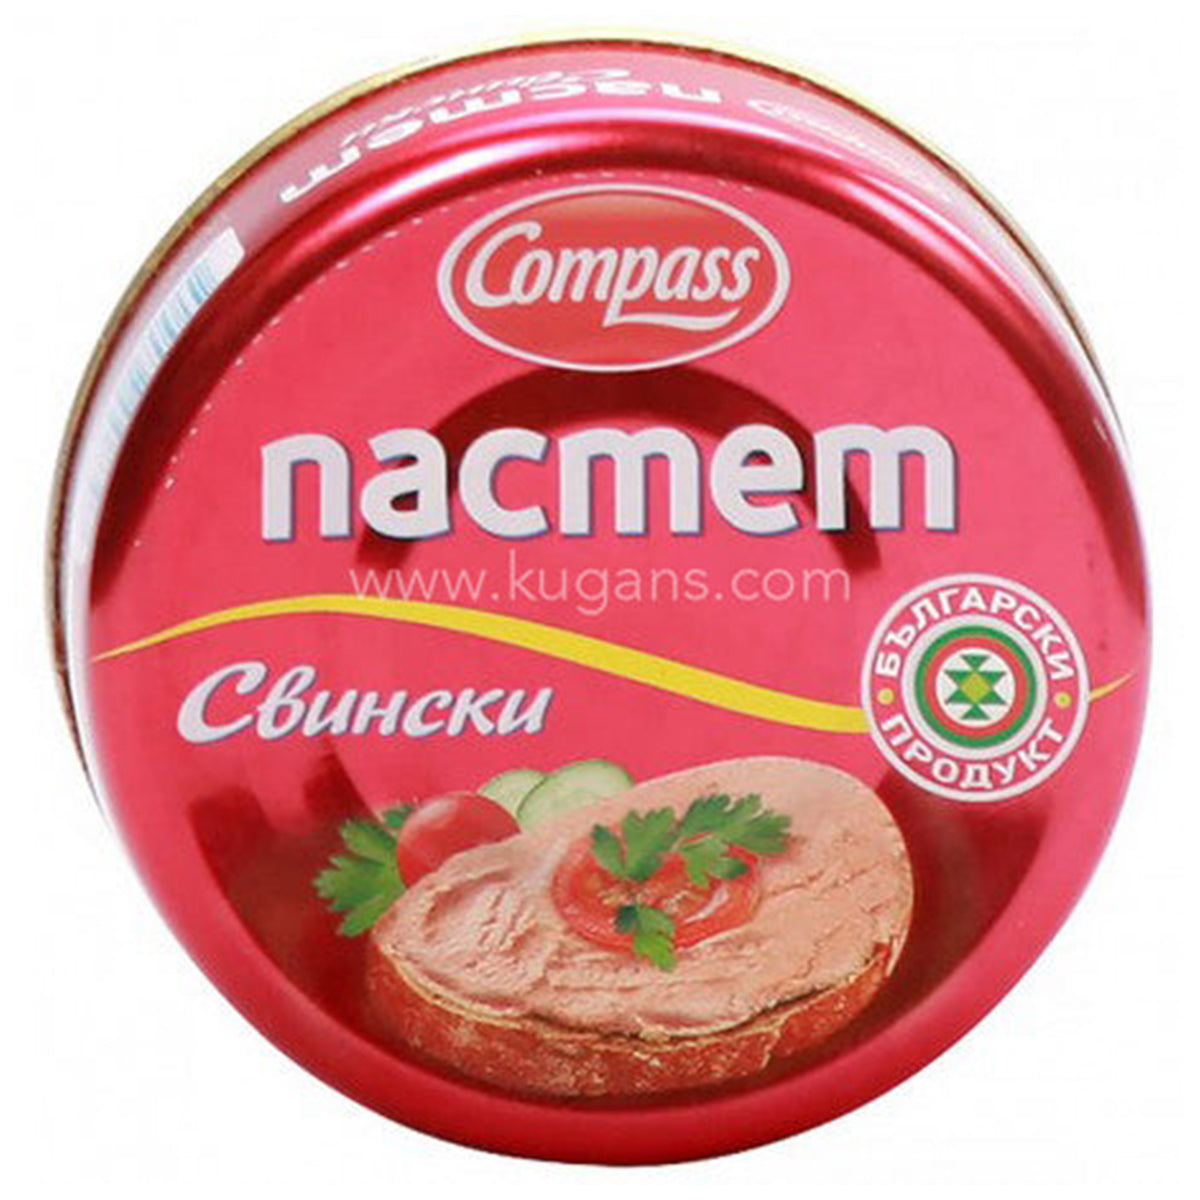 A tin of Compass - Apetit Pork Pate - 300g with tomatoes and cucumbers.